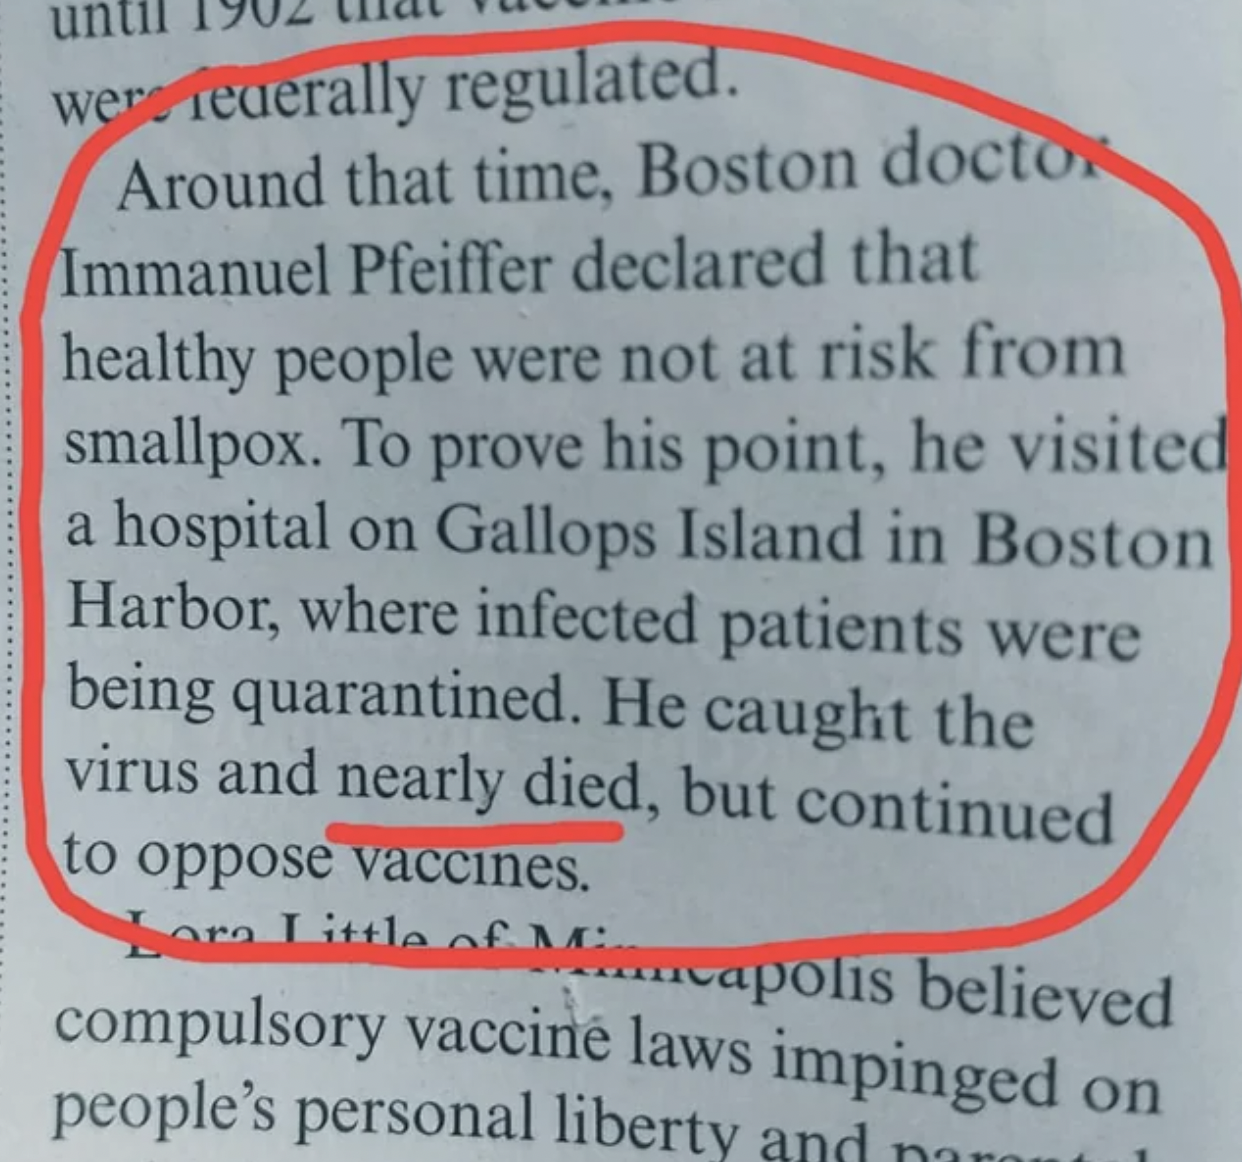 material - were federally regulated. Around that time, Boston doctor Immanuel Pfeiffer declared that healthy people were not at risk from smallpox. To prove his point, he visited a hospital on Gallops Island in Boston Harbor, where infected patients were